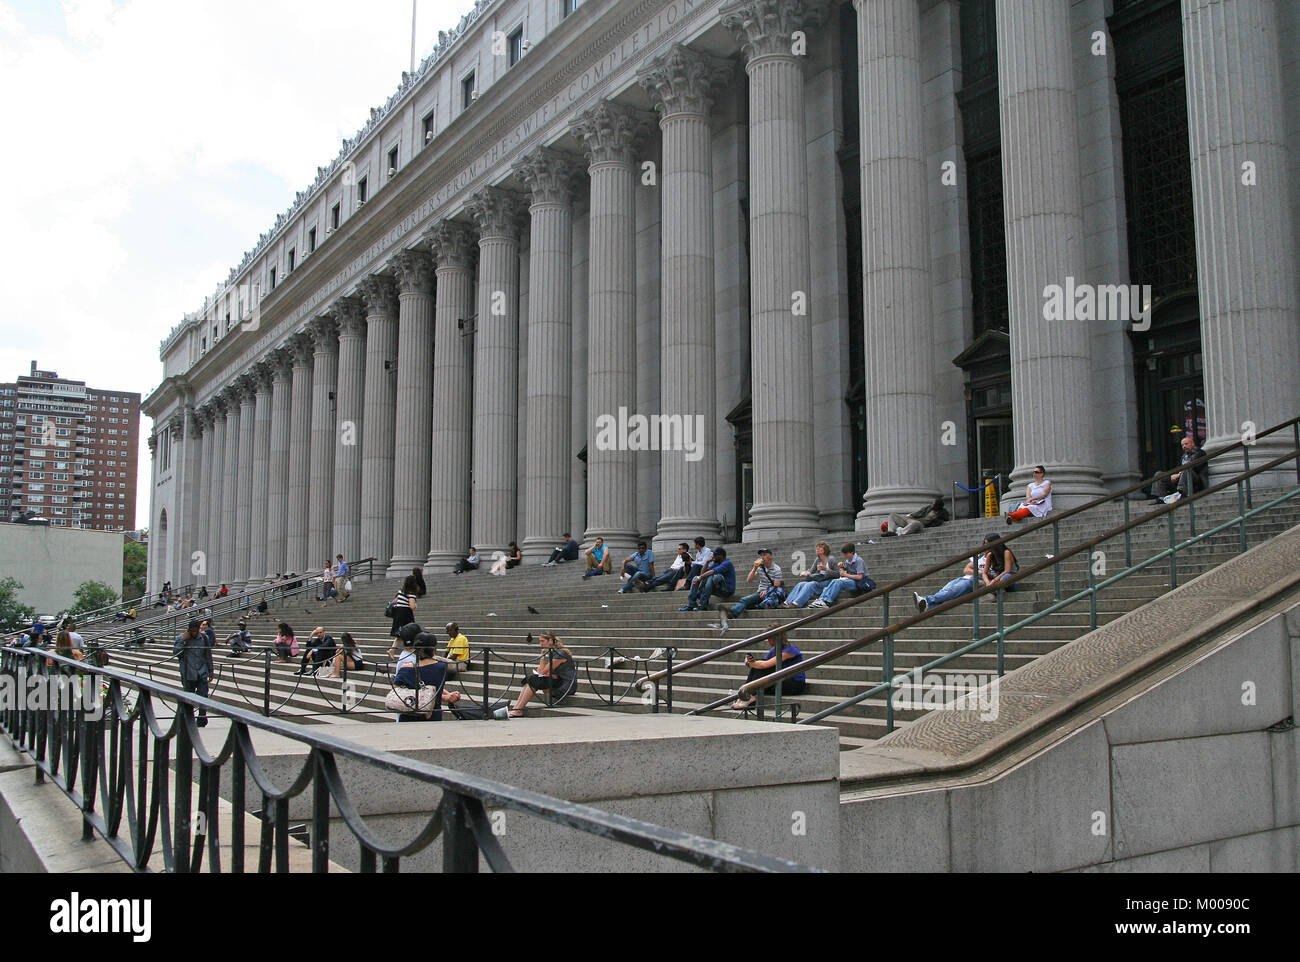 The James A. Farley Post Office Building, New York City, New York State, USA. Stock Photo